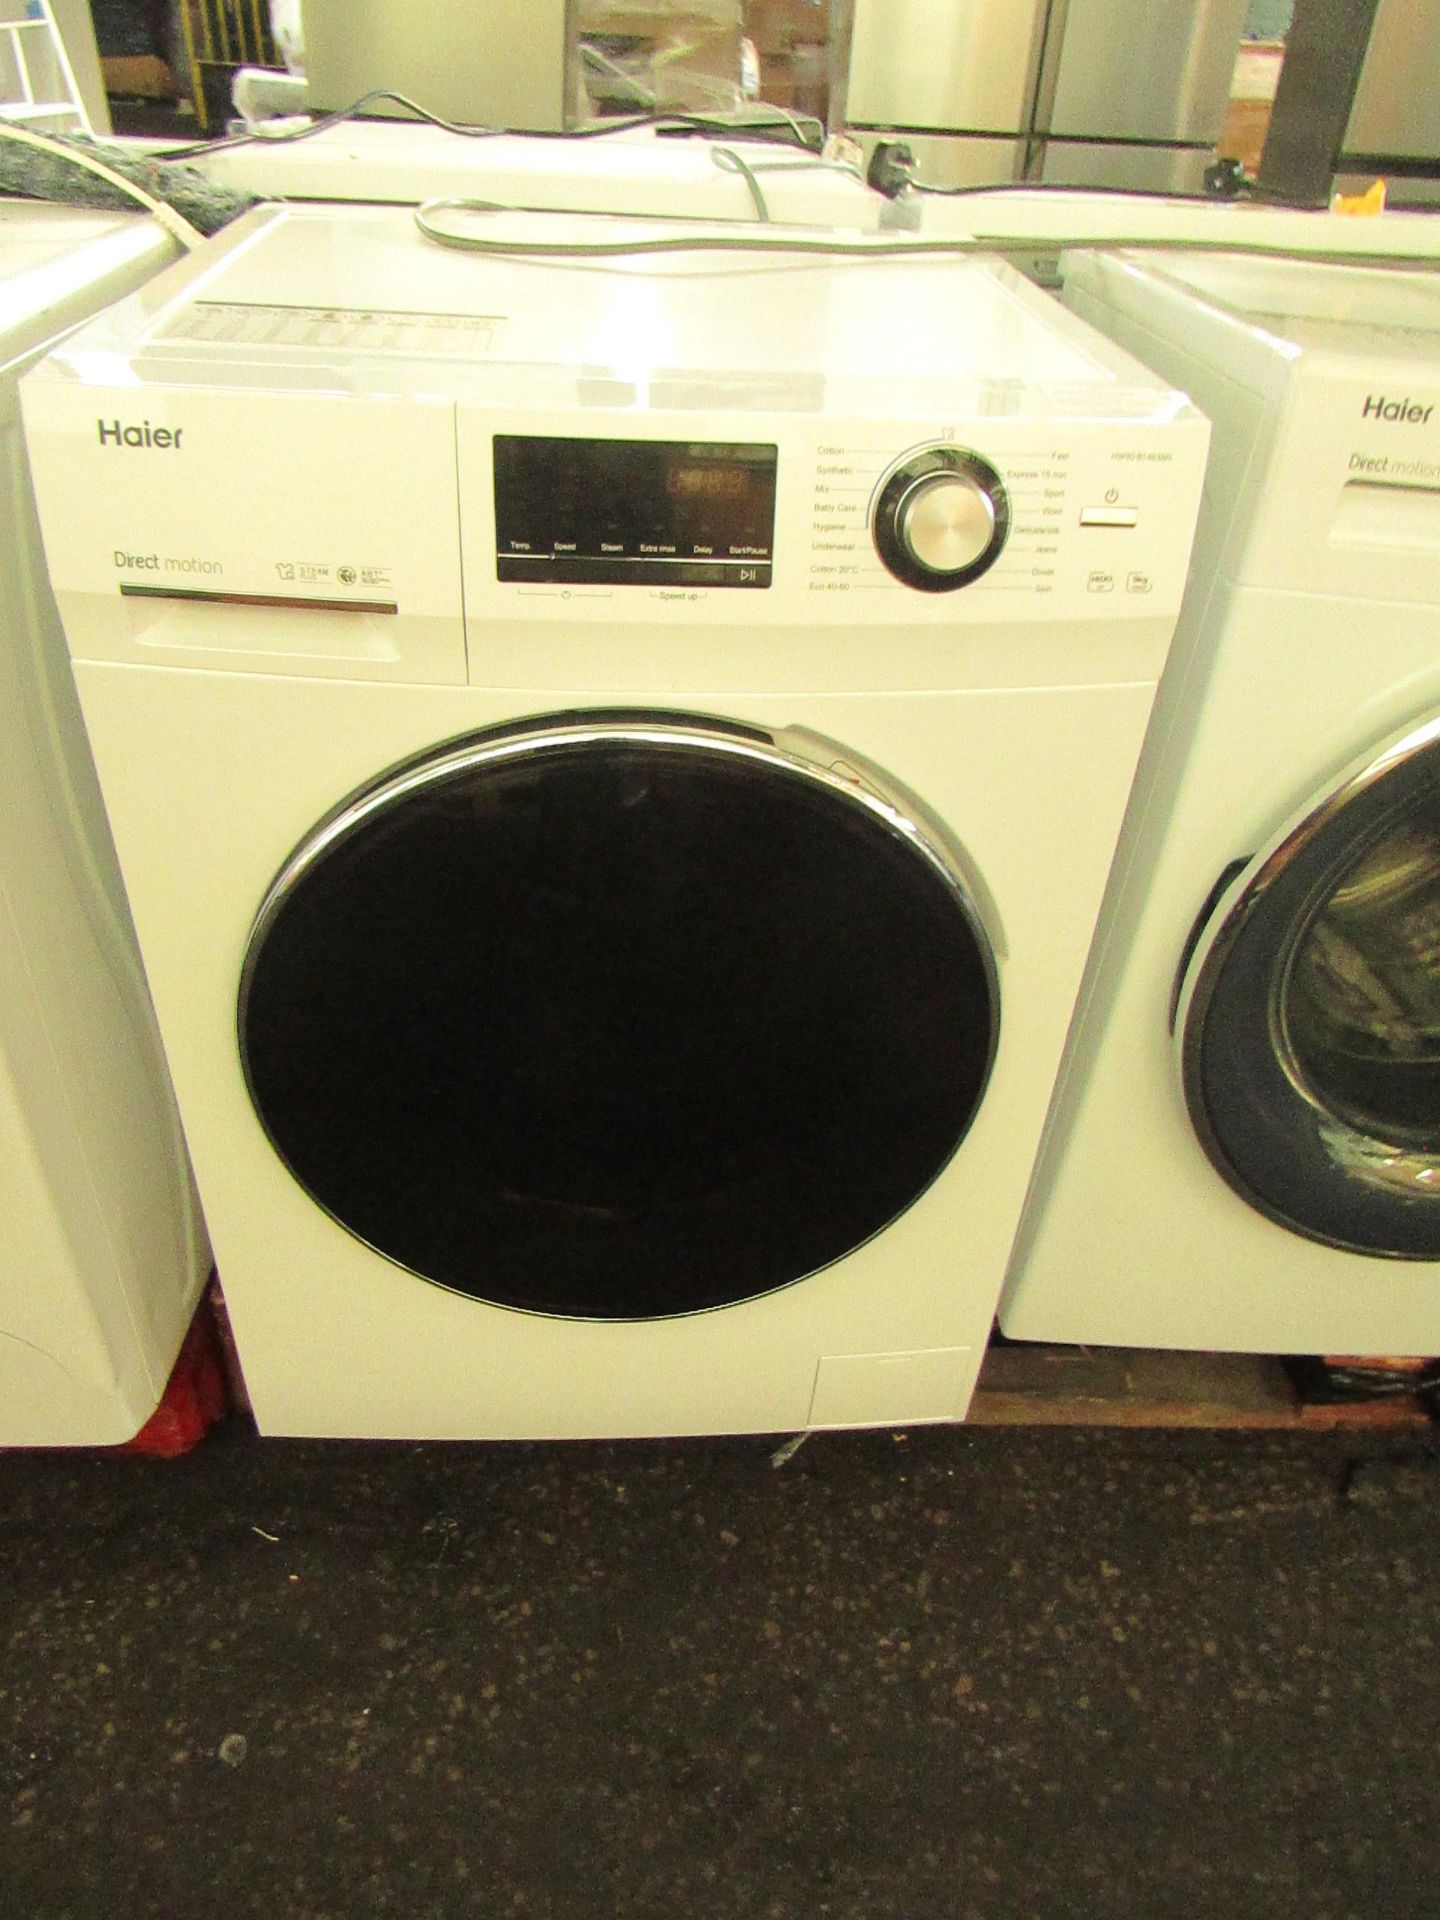 Haier HW90-B14636N 9KG washing machine, Powers on and Spins, we have not checked this any further or